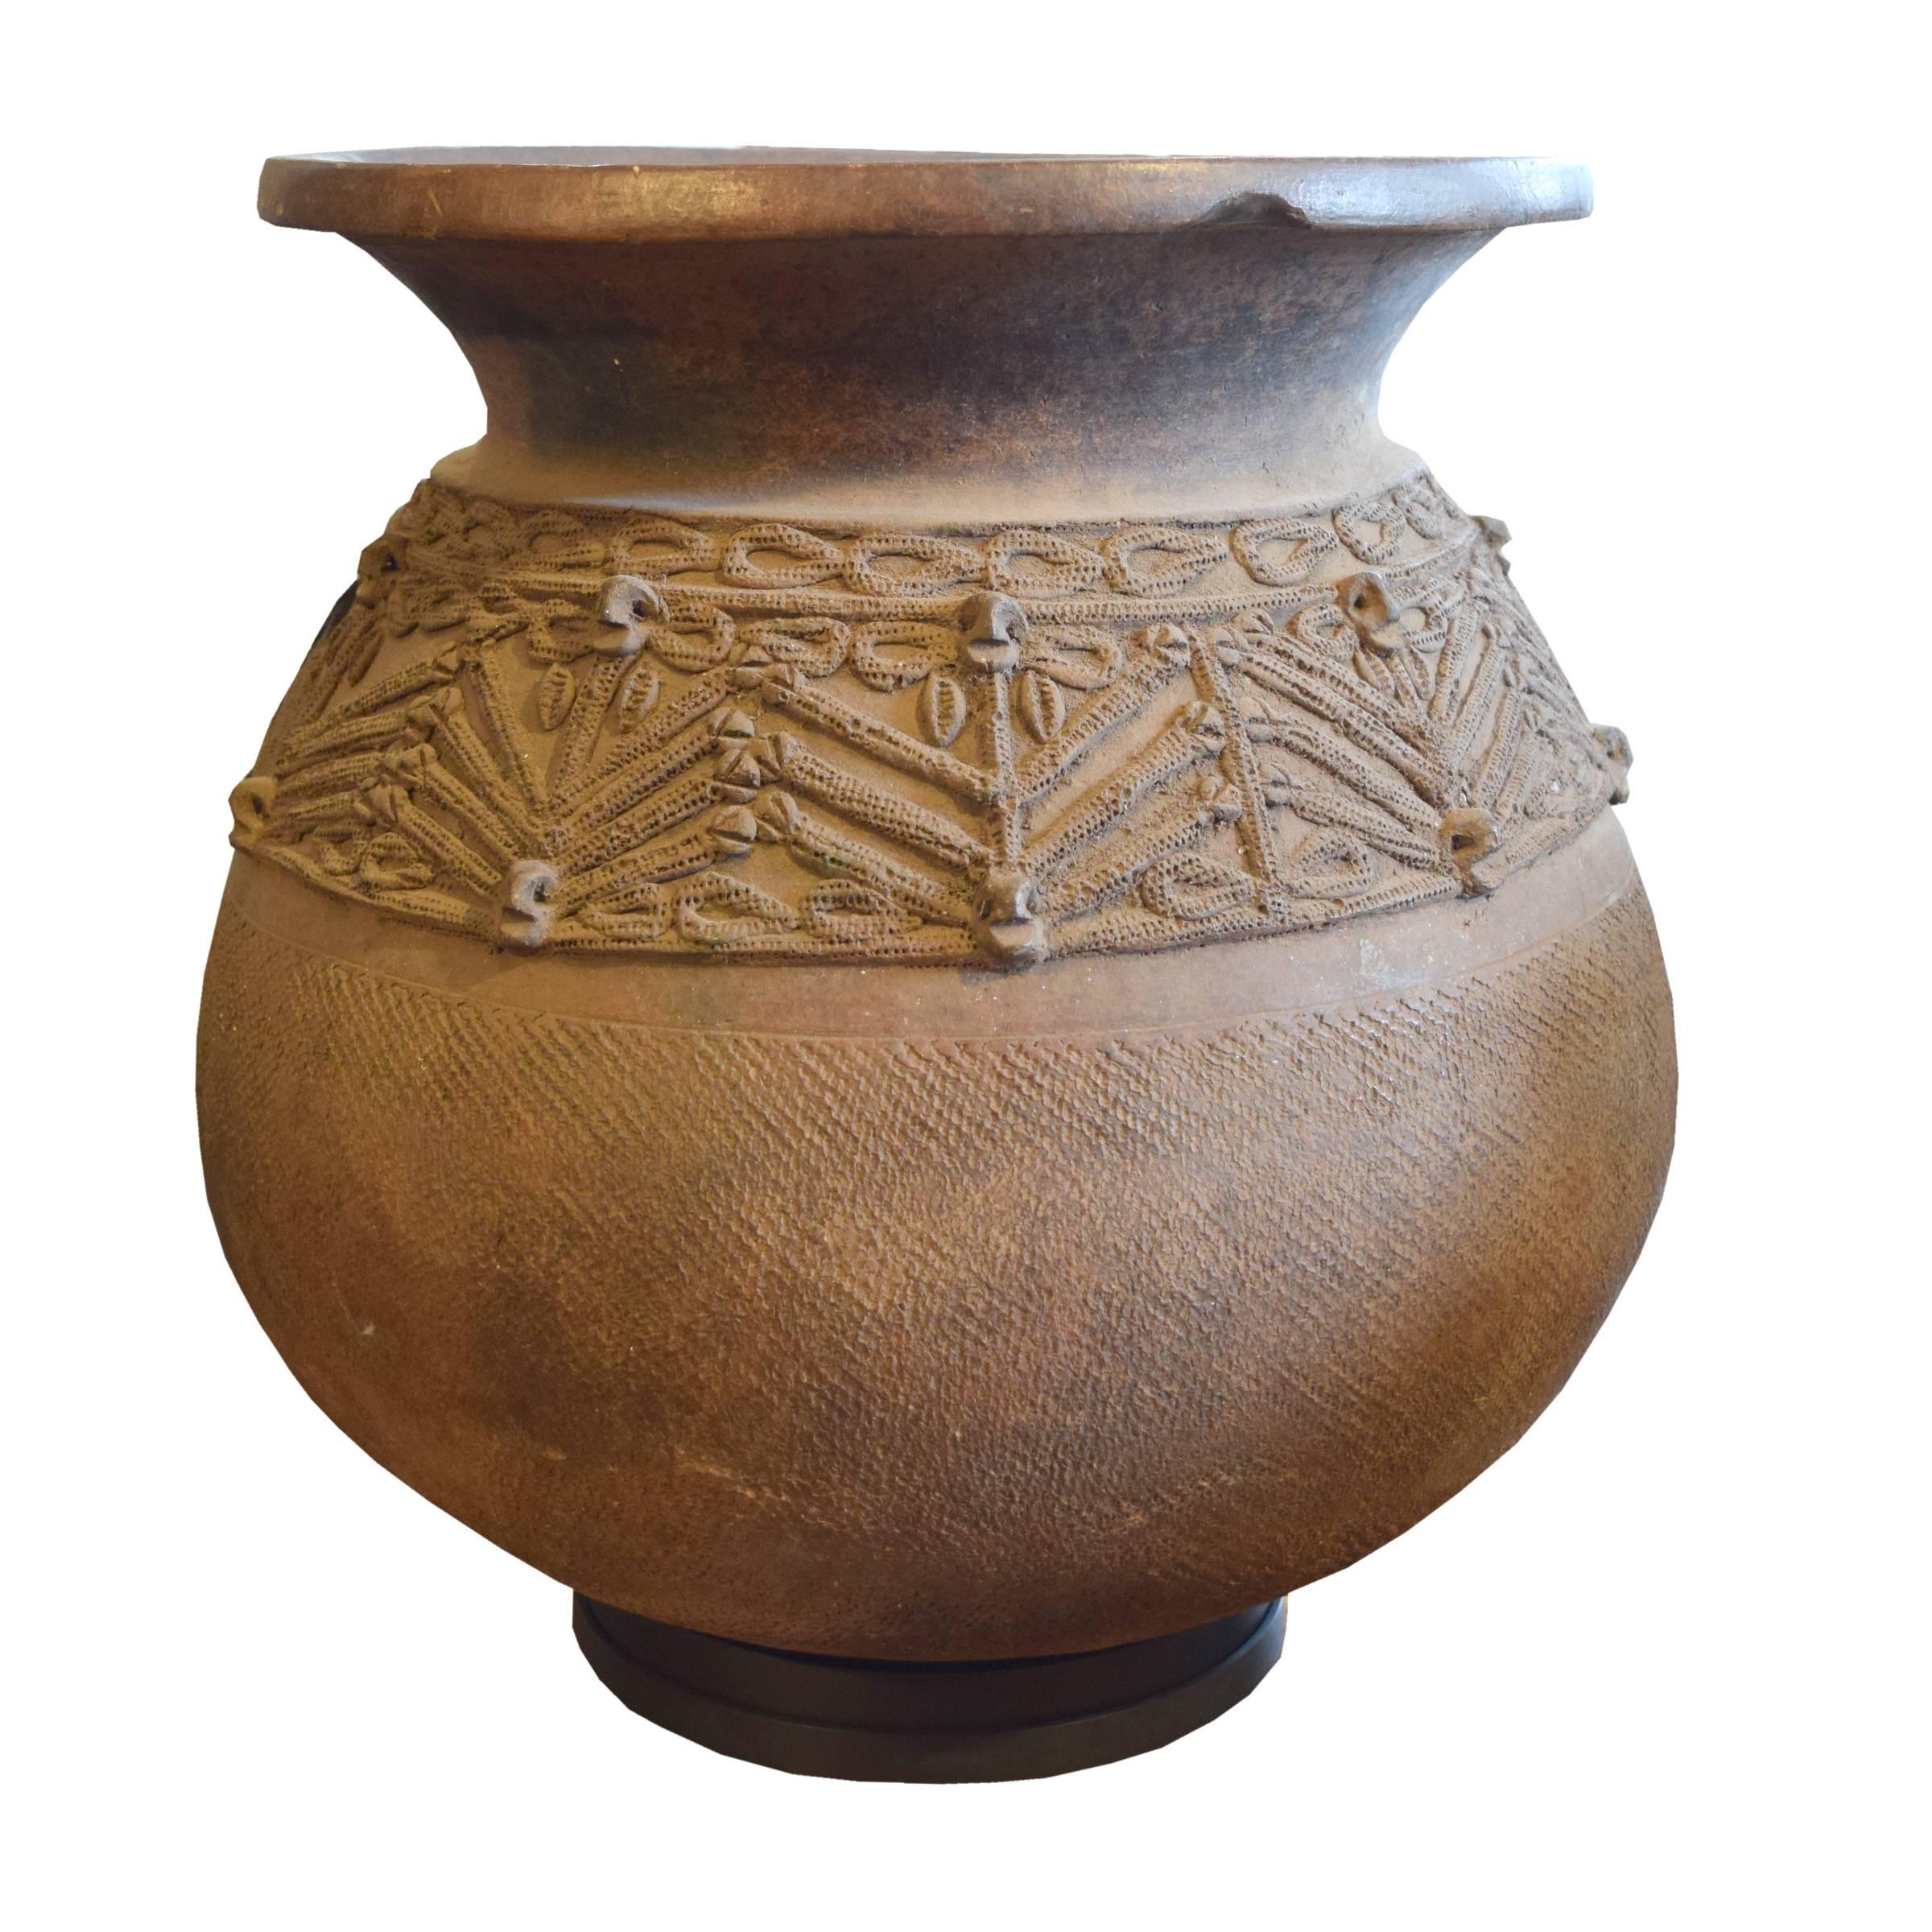 A hand-built African earthenware water vessel with applied relief. On a custom mount.